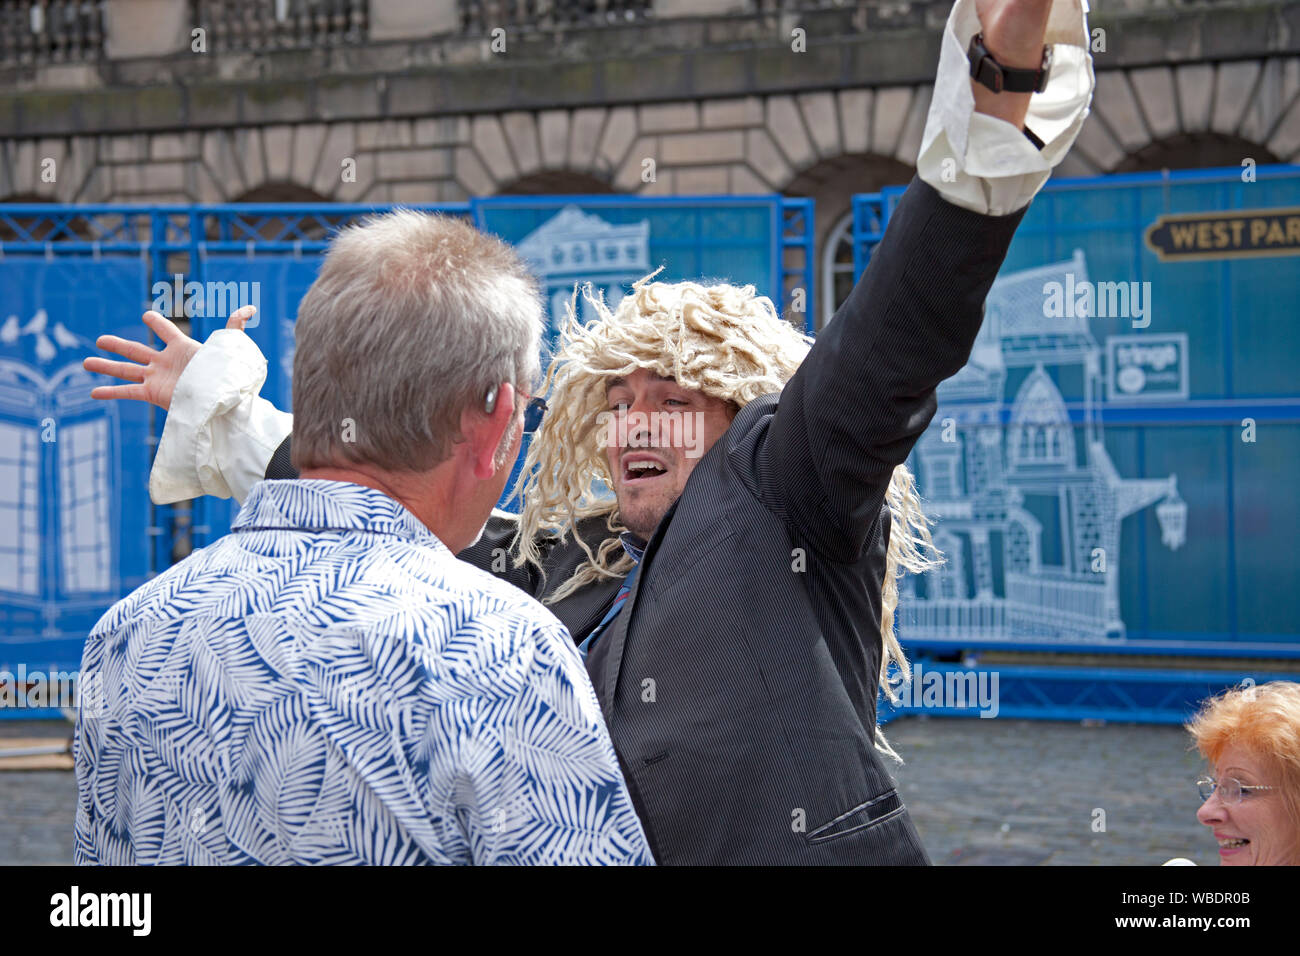 Edinburgh Fringe Festival, Scotland, UK. 26th Aug, 2019. Final day of the 2019 Edinburgh Fringe and the sun shone, with reported record breaking audiences and the most tickets sold ever. Corey Pickett entertains the audience in Parliament Square with his whacky interactive performance Stock Photo